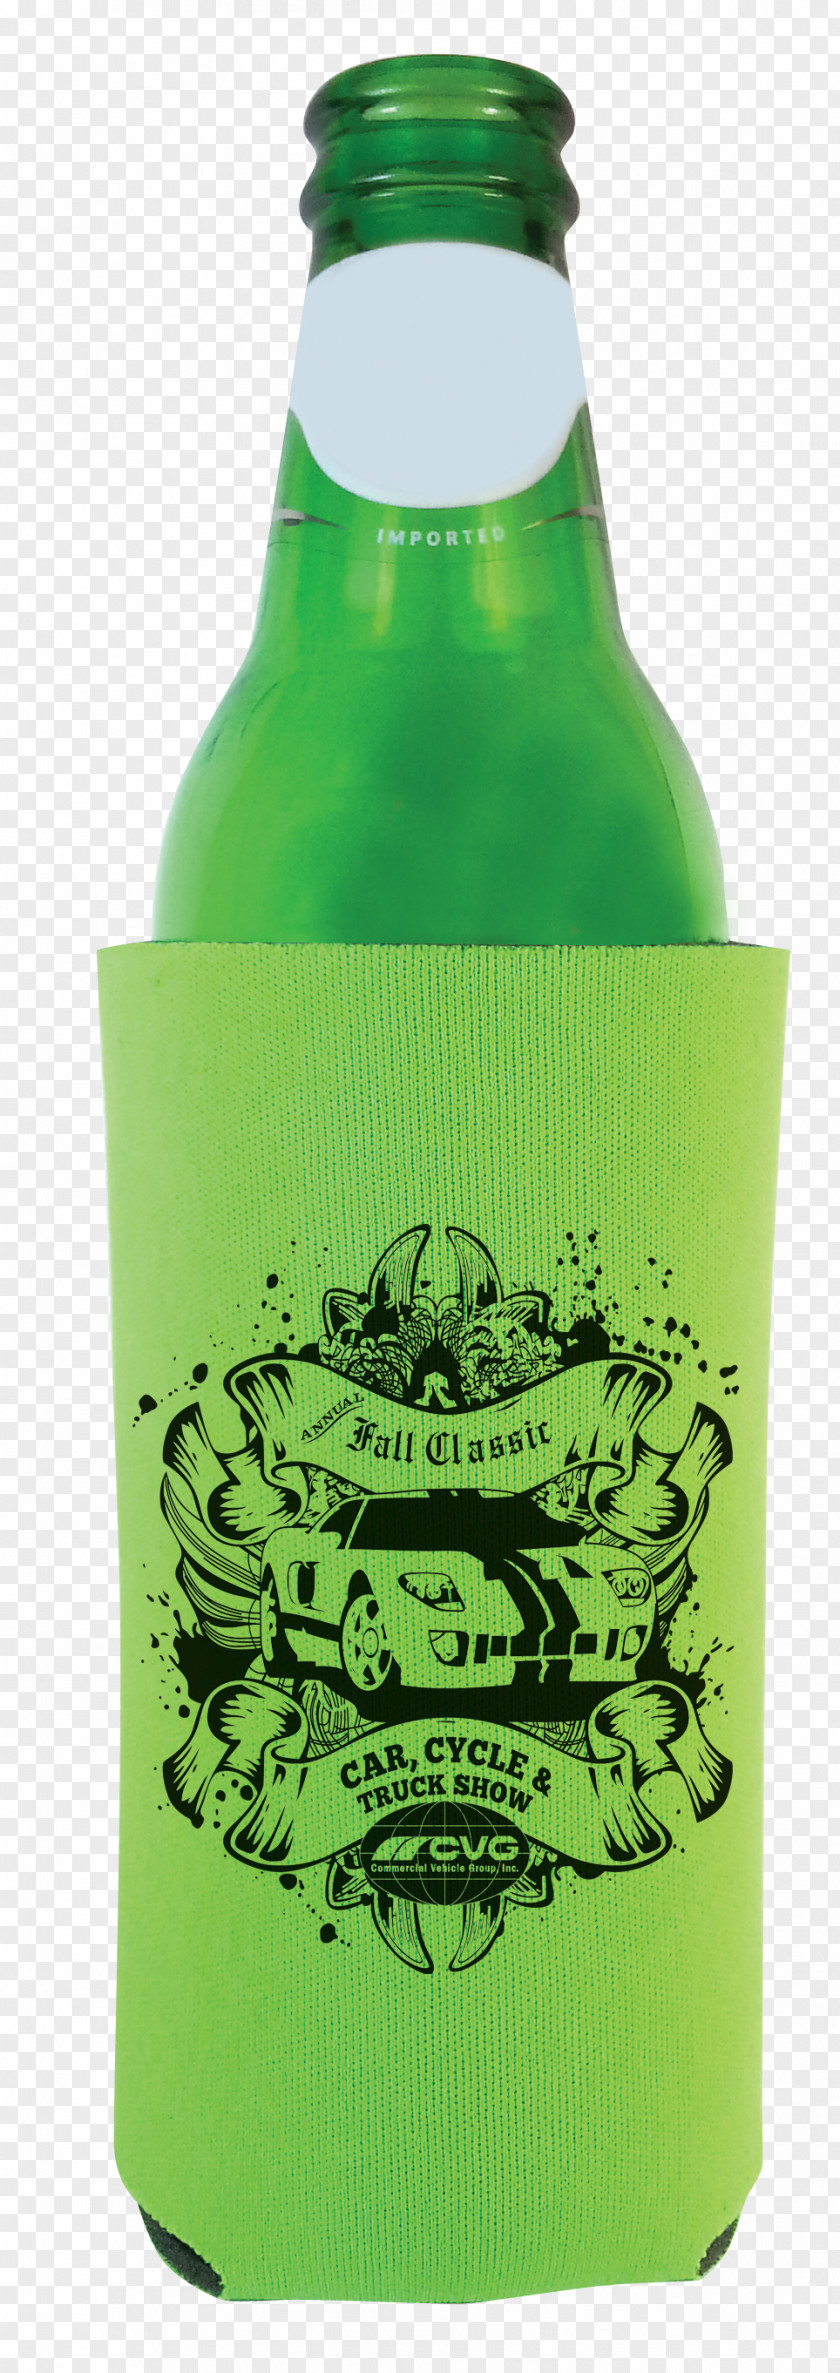 Business Beer Bottle Promotional Merchandise Advertising PNG